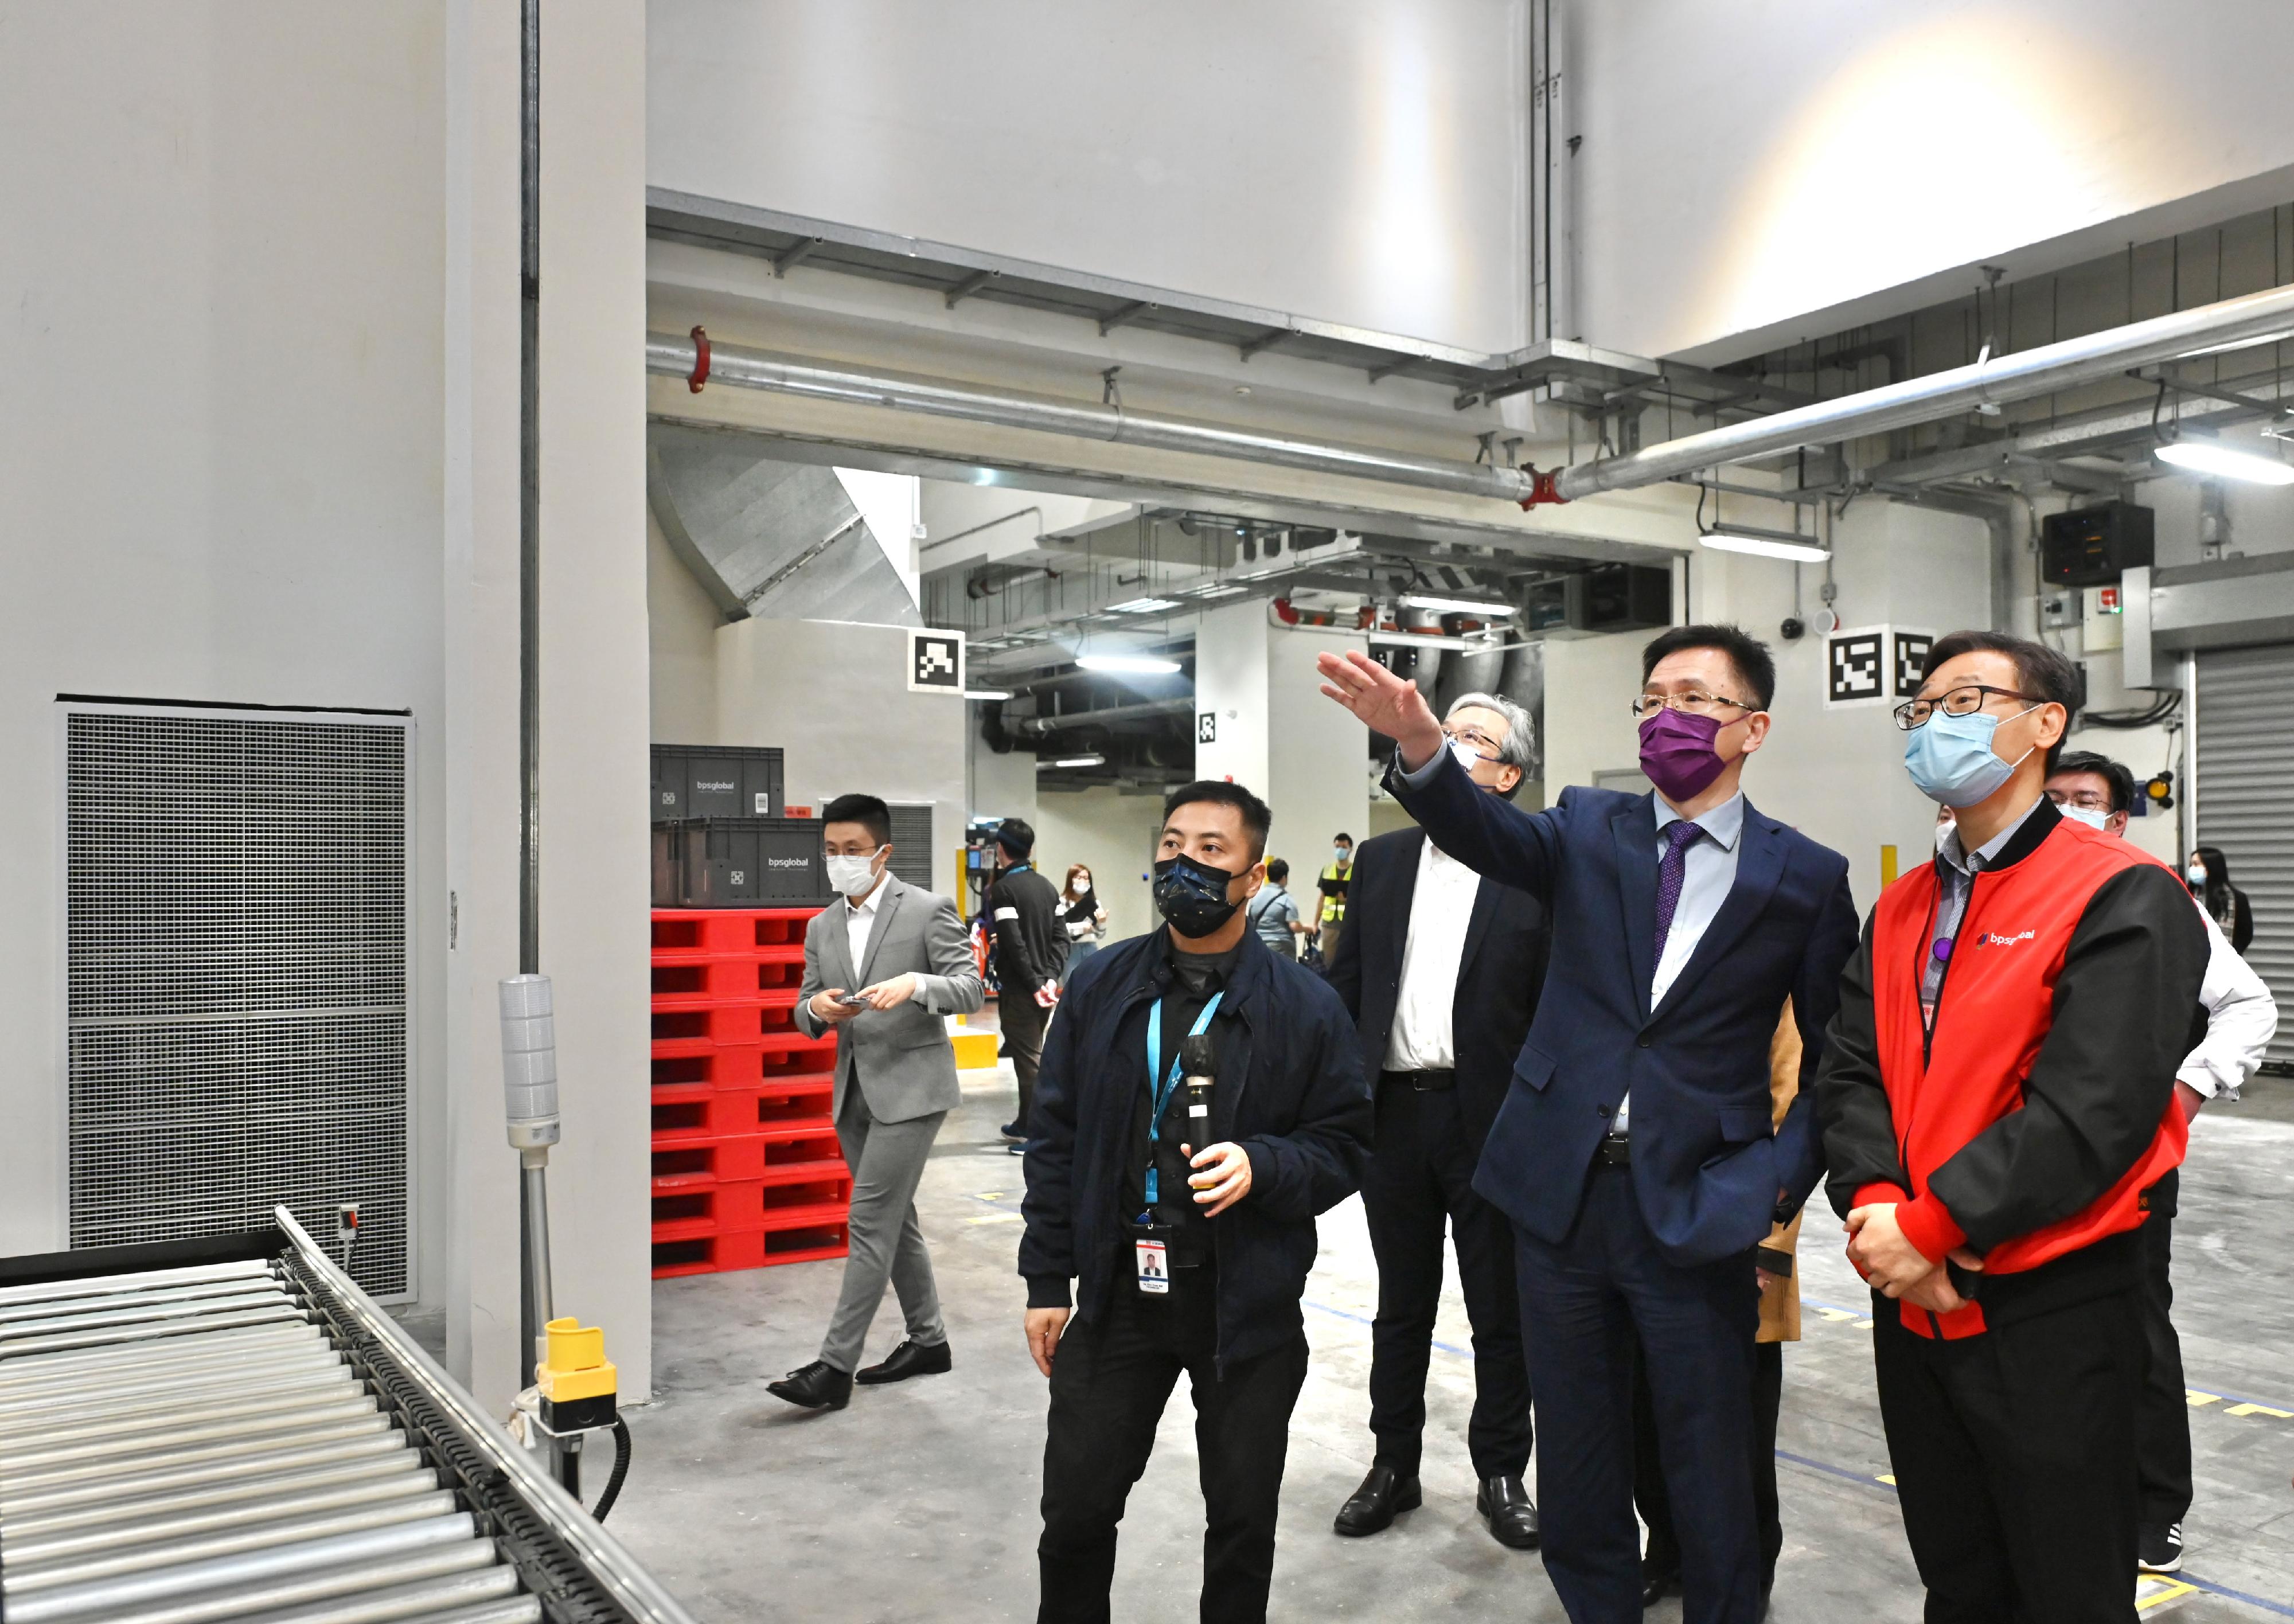 The Secretary for Innovation, Technology and Industry, Professor Sun Dong (second right), tours an enterprise that focuses on smart logistics and supply chain management in the Advanced Manufacturing Centre today (December 1).